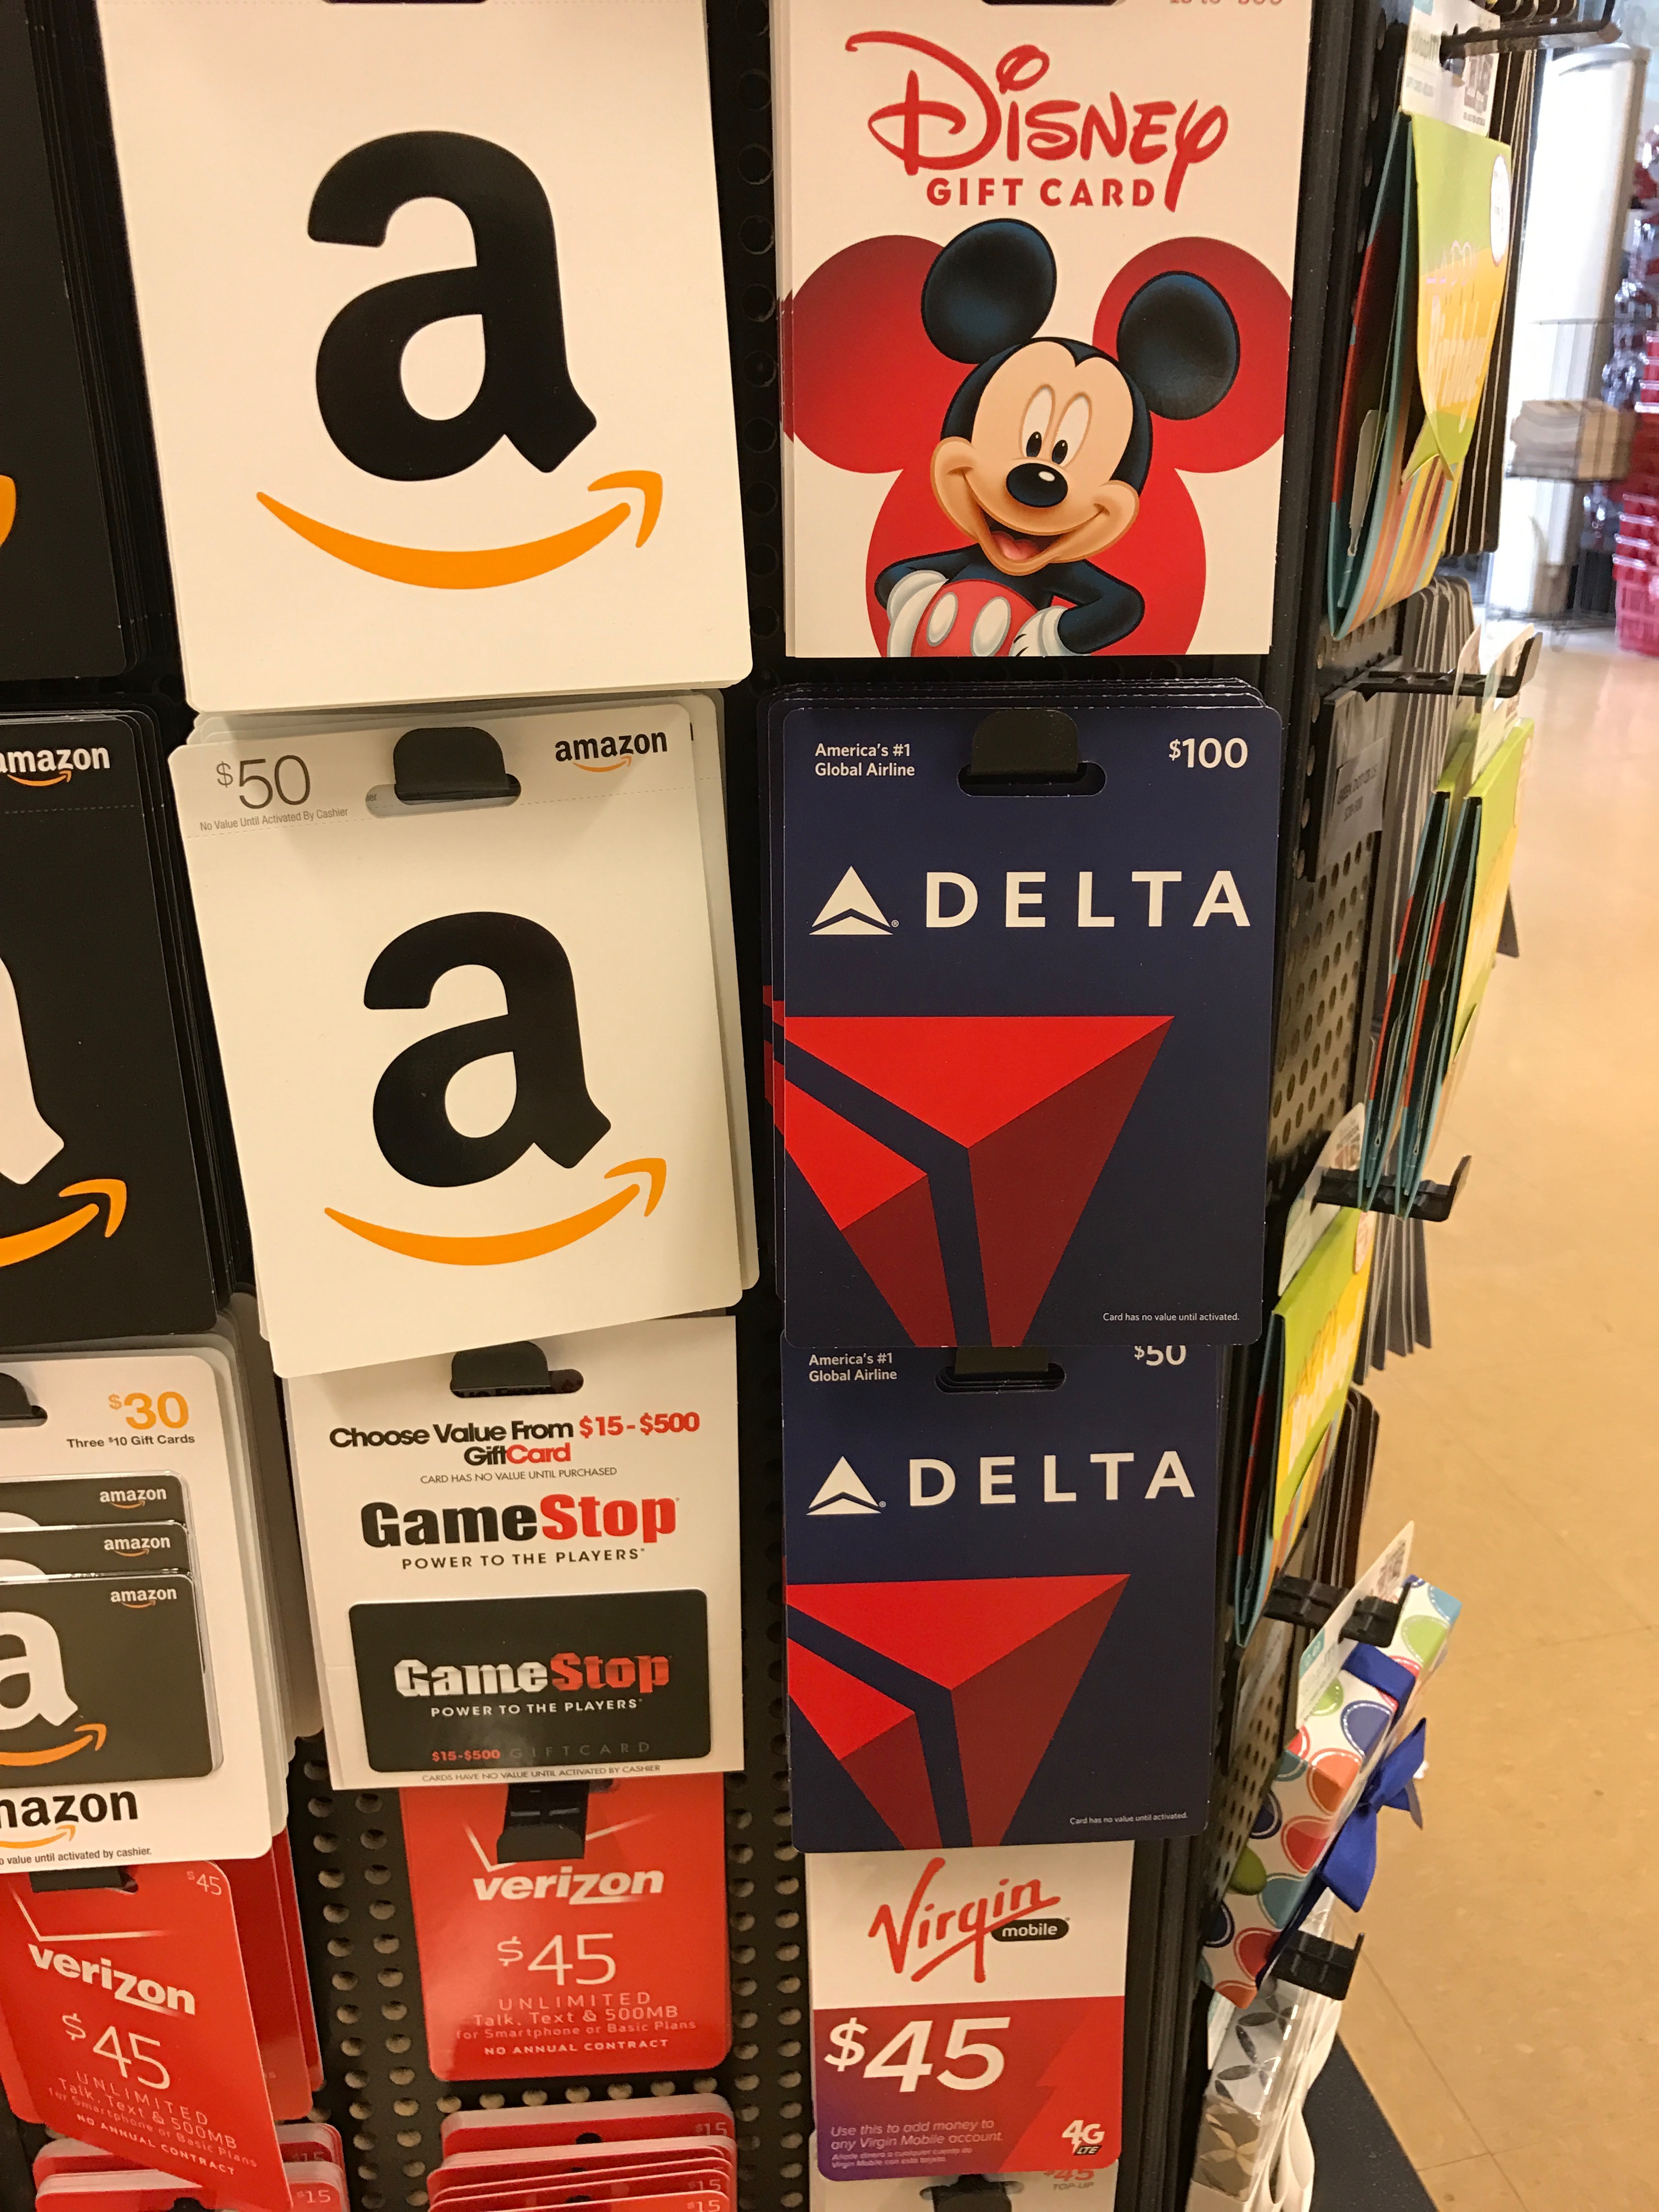 Delta Gift Cards Popped Up At My Office Depot - Pizza In Motion